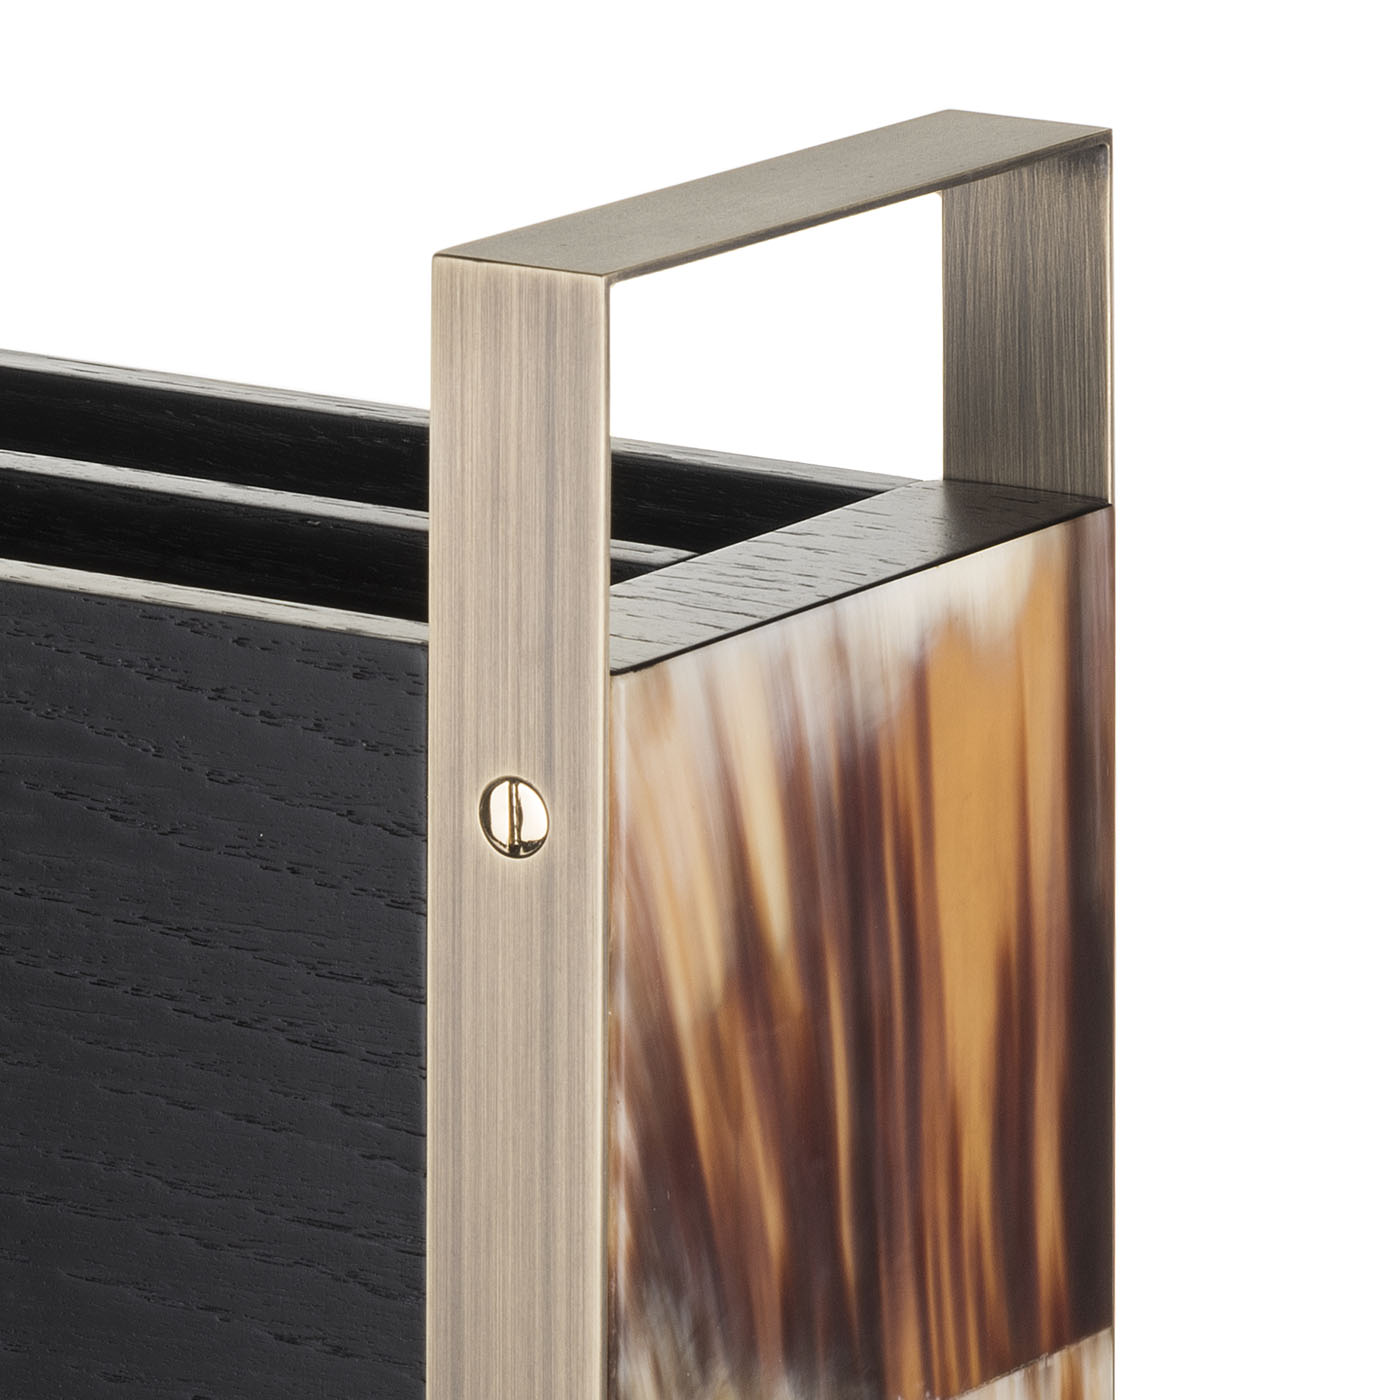 Coat stands and complementary furniture - Dante magazine rack in black oak veneer and horn - detail - Arcahorn